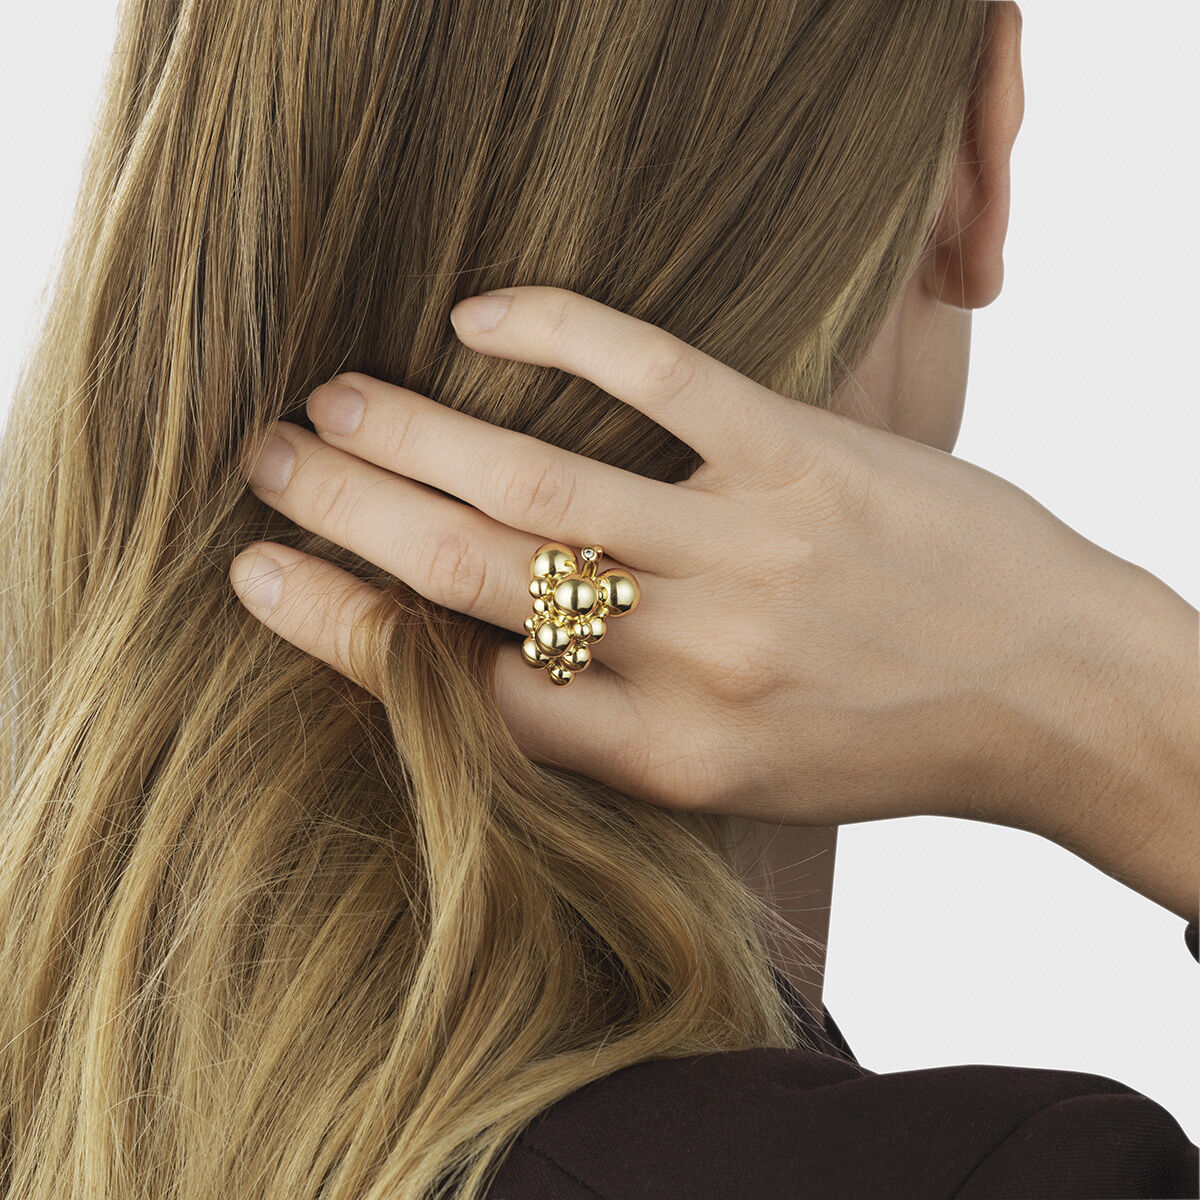 Moonlight rings and jewelry | Shop at Georg Jensen